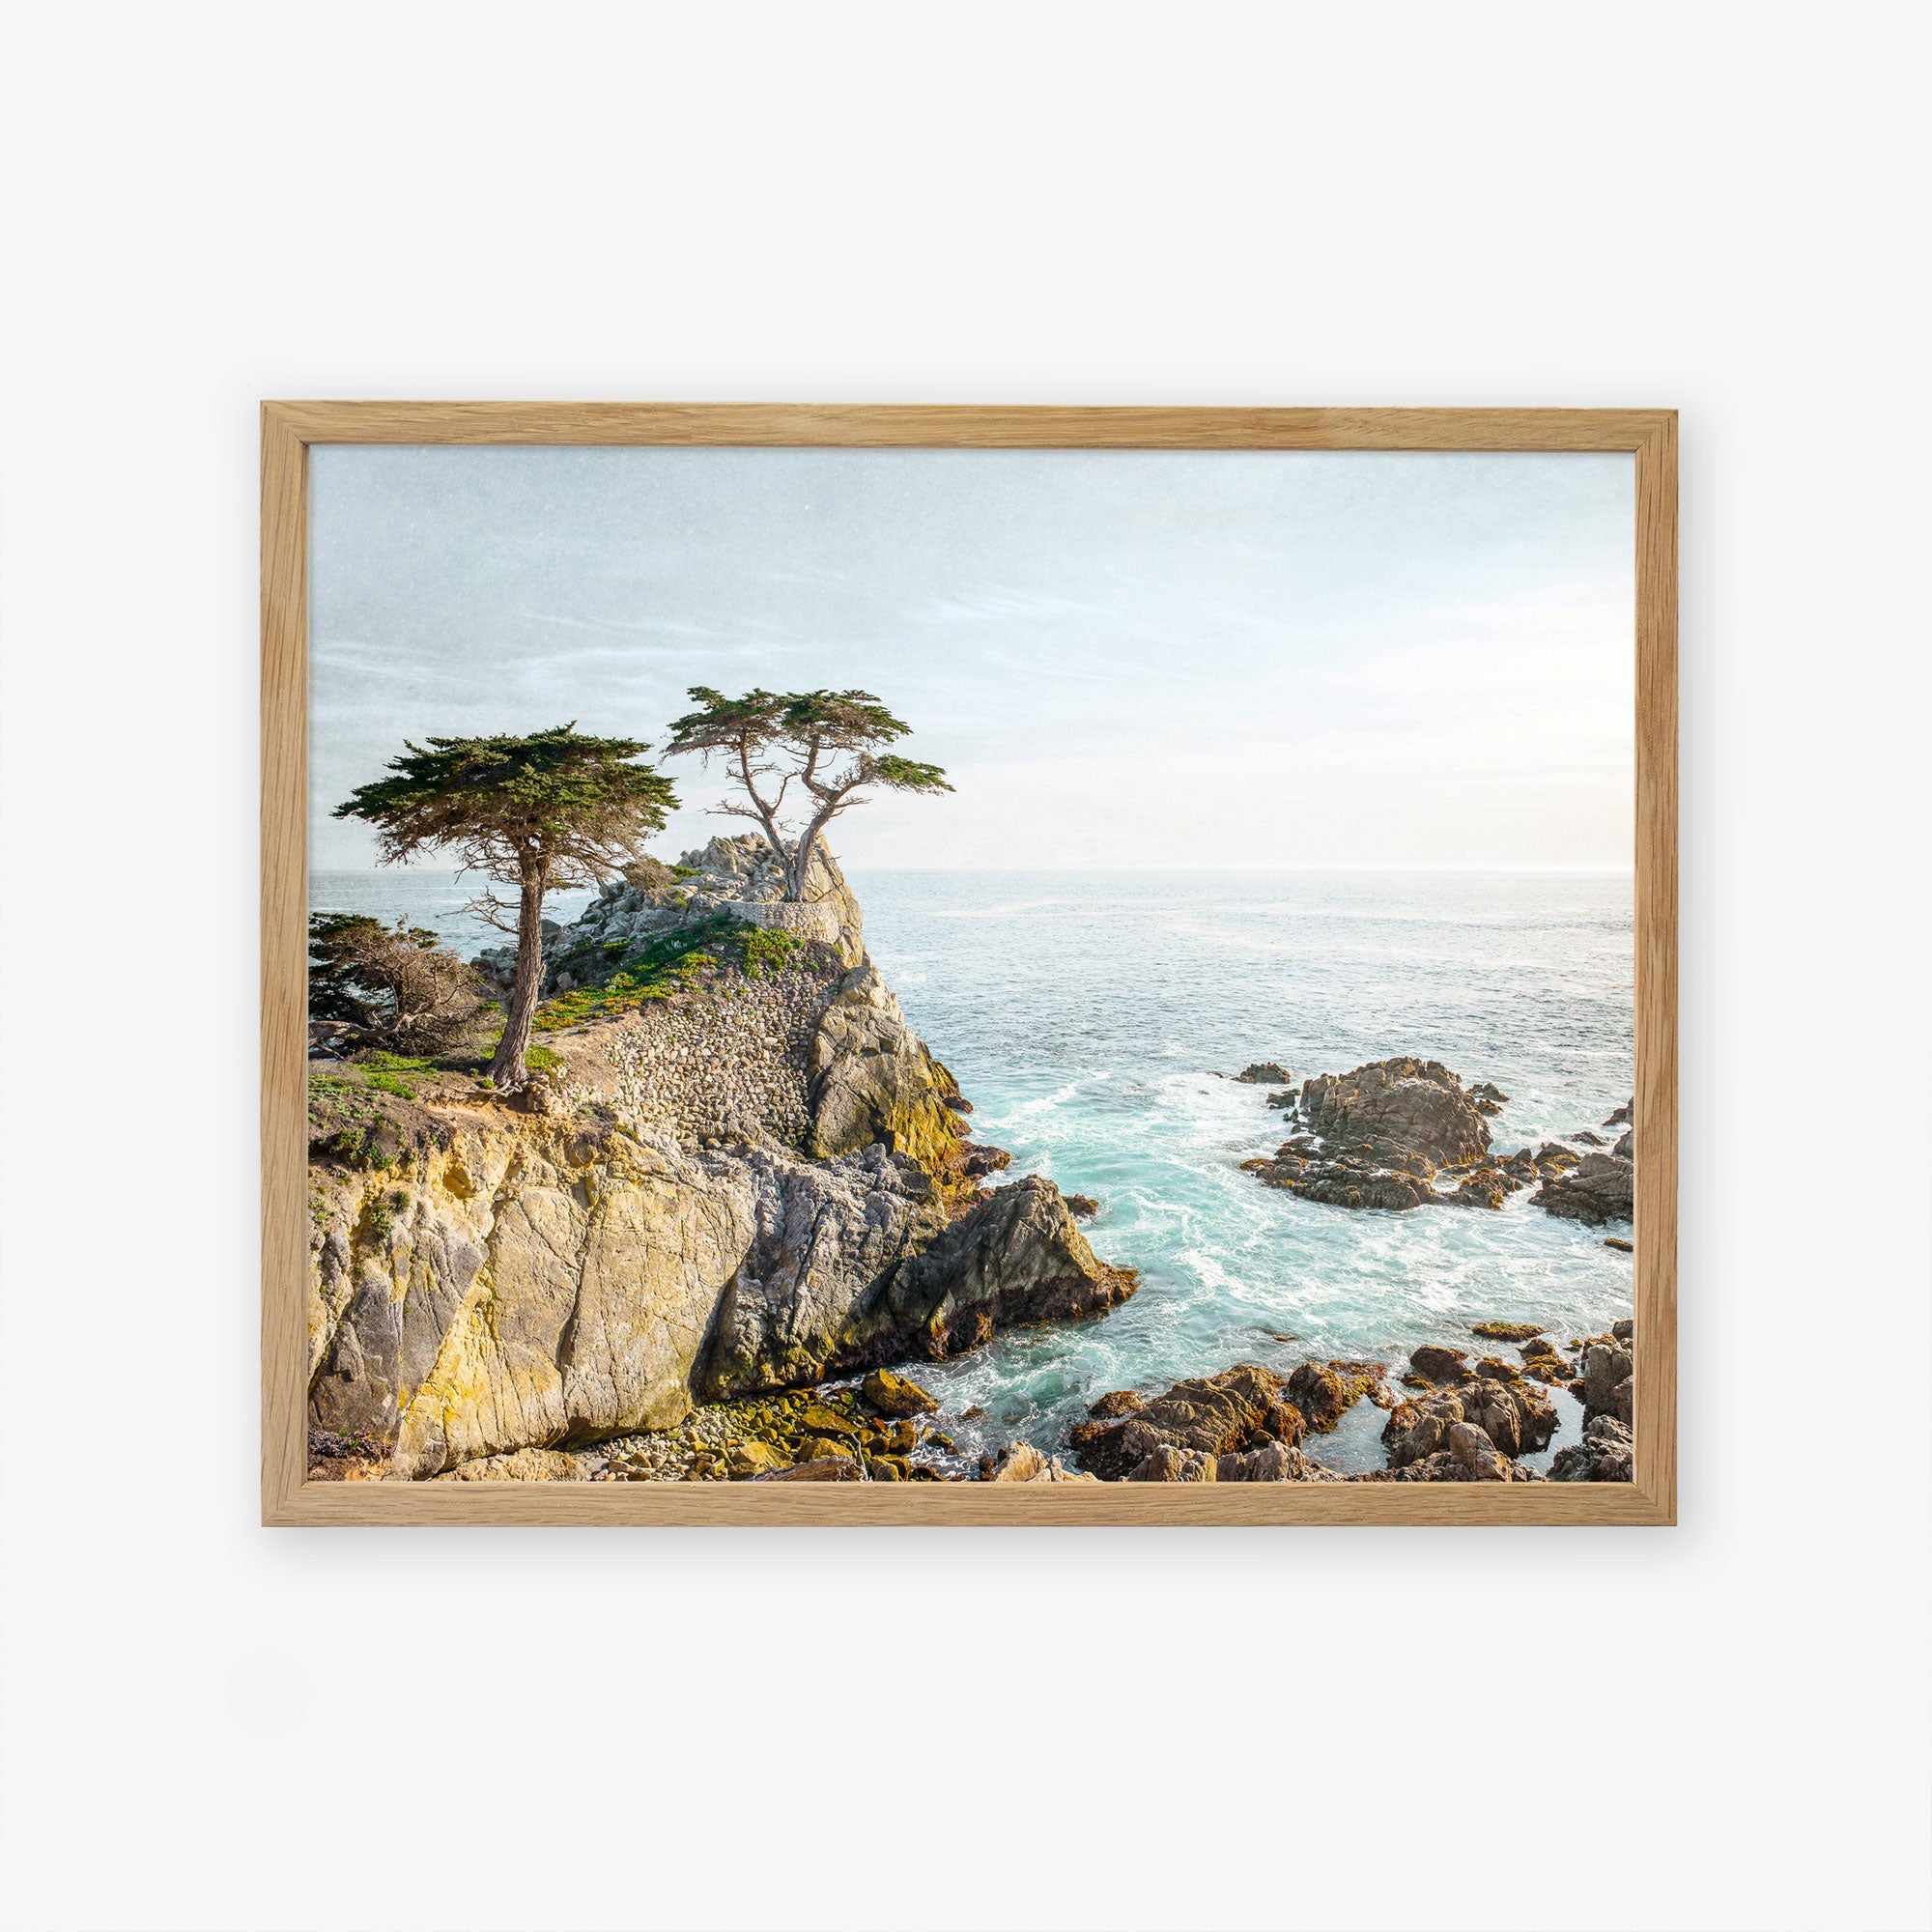 A framed painting depicting a scenic coastal landscape with rugged cliffs, a few windswept trees, and Offley Green&#39;s &#39;California Coastal Print, &#39;Lone Cypress&#39; photography under a clear sky.